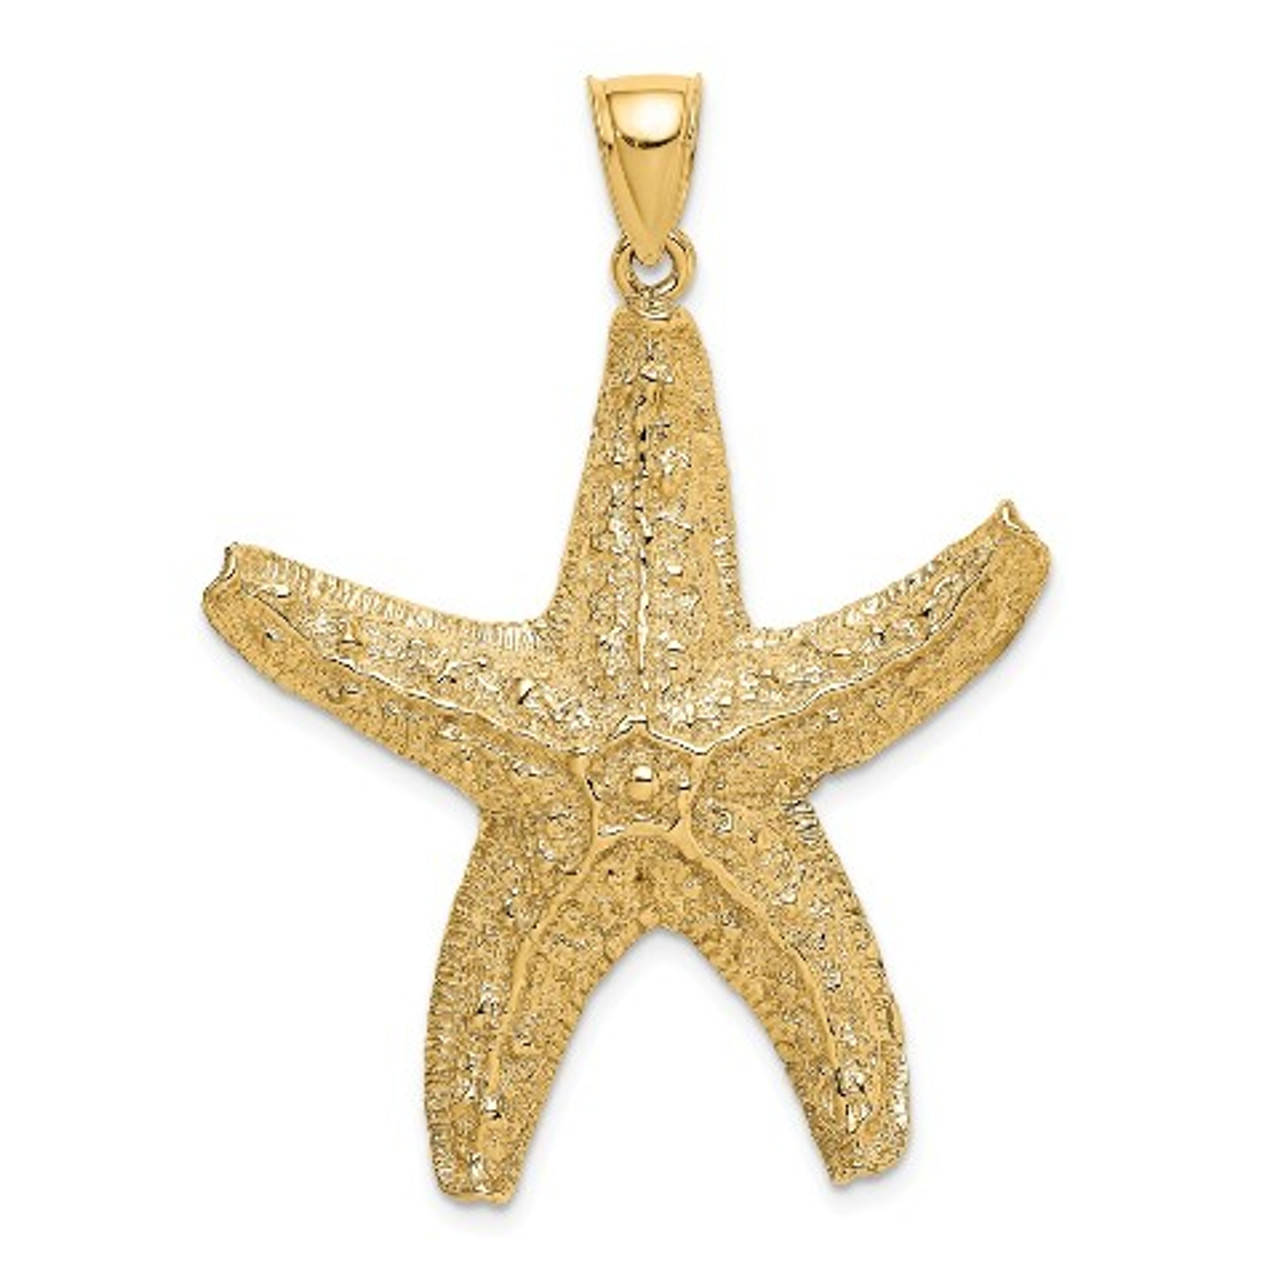 14K Yellow Gold Textured Large Starfish Charm Pendant - (A93-172)